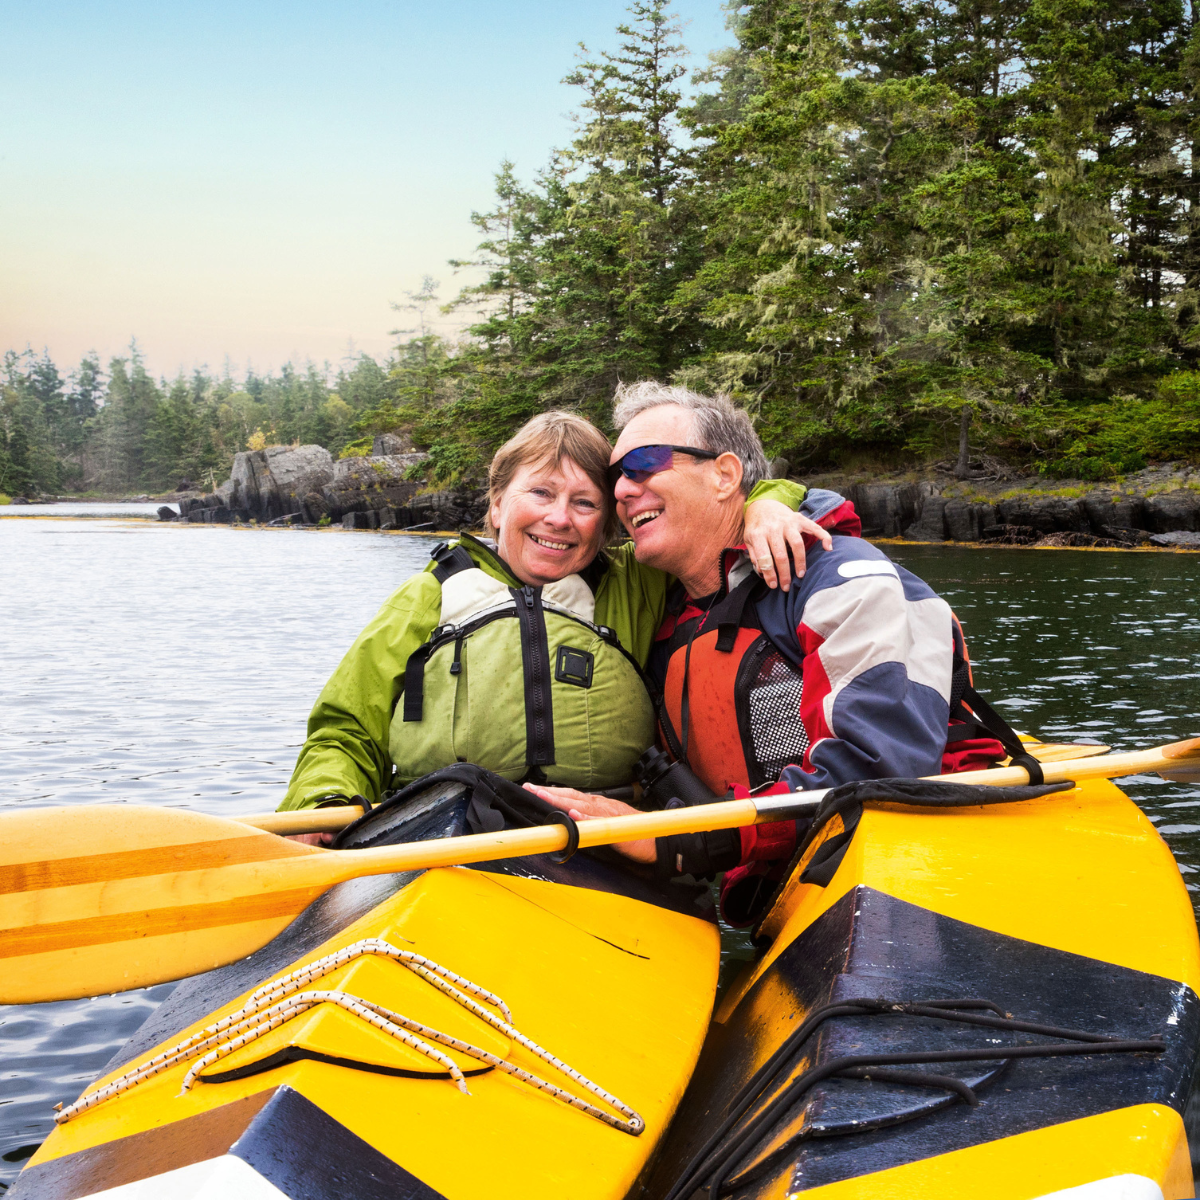 18. Embark on an Unforgettable Adventure Together with a Unique Kayaking Experience